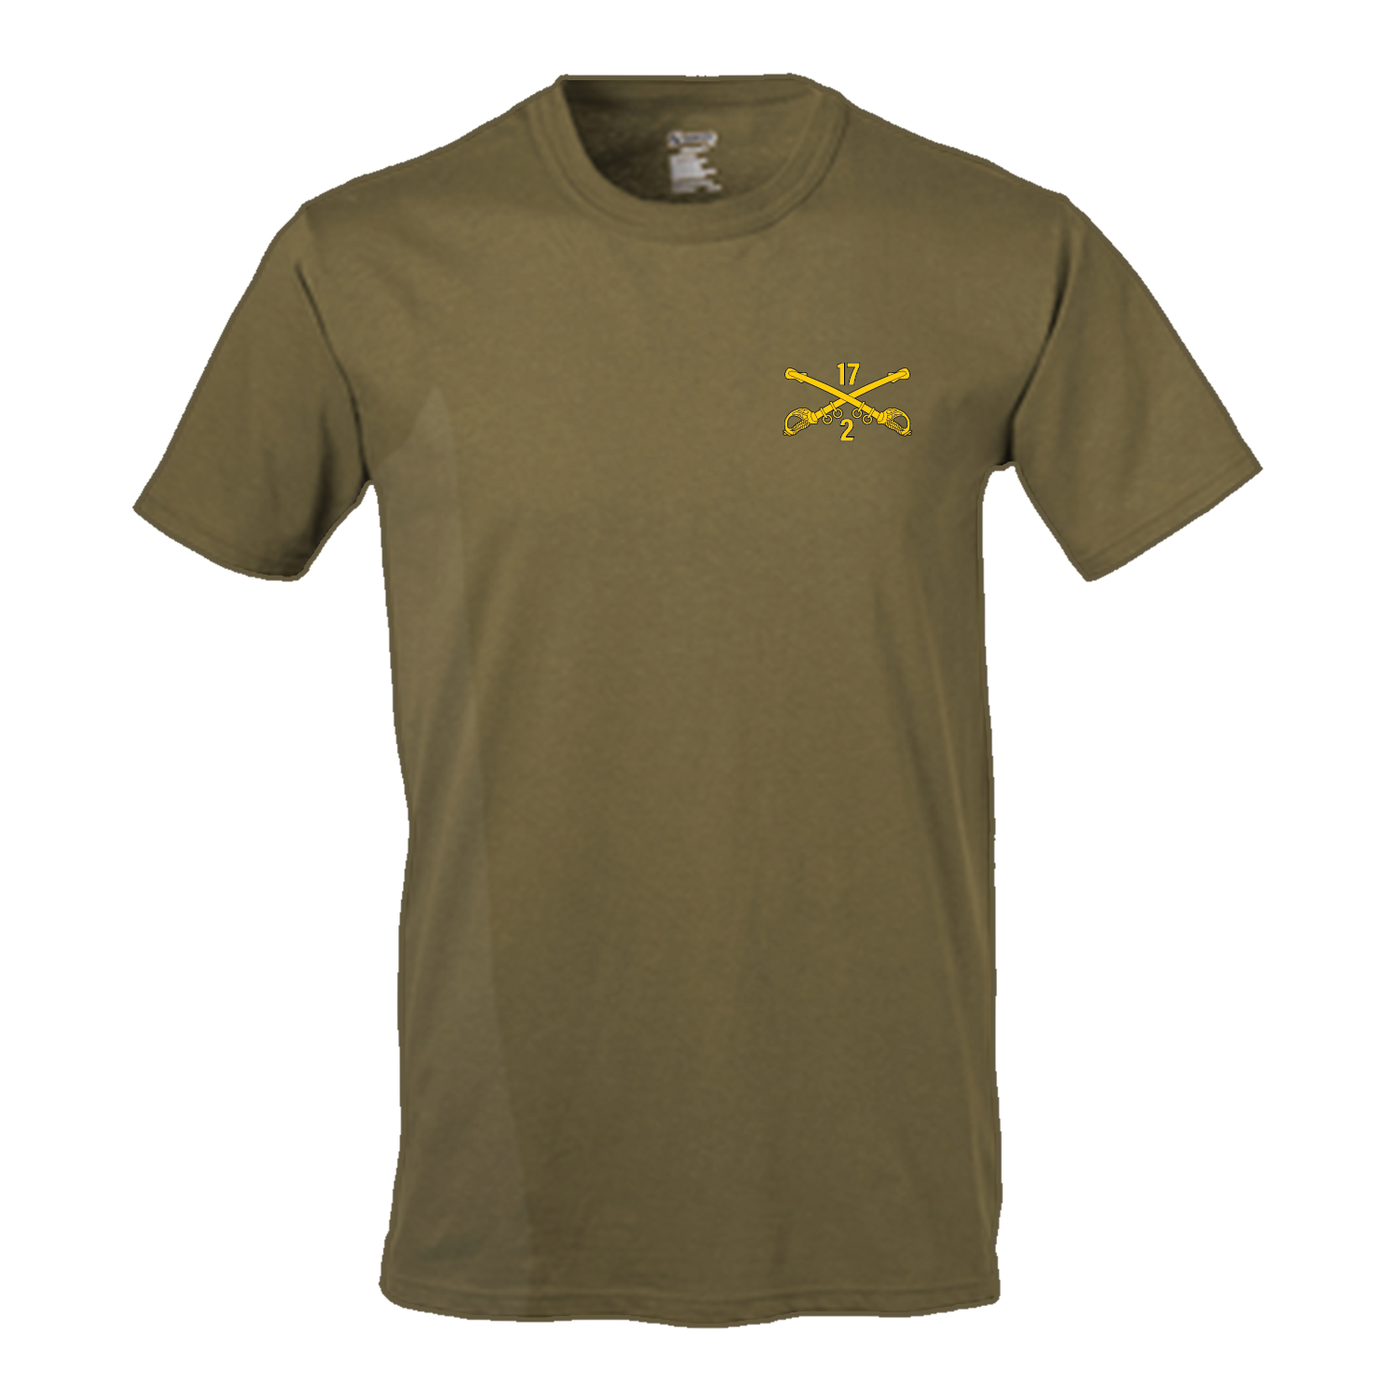 2-17 CAV "Outfront" Tan 499 T-Shirt